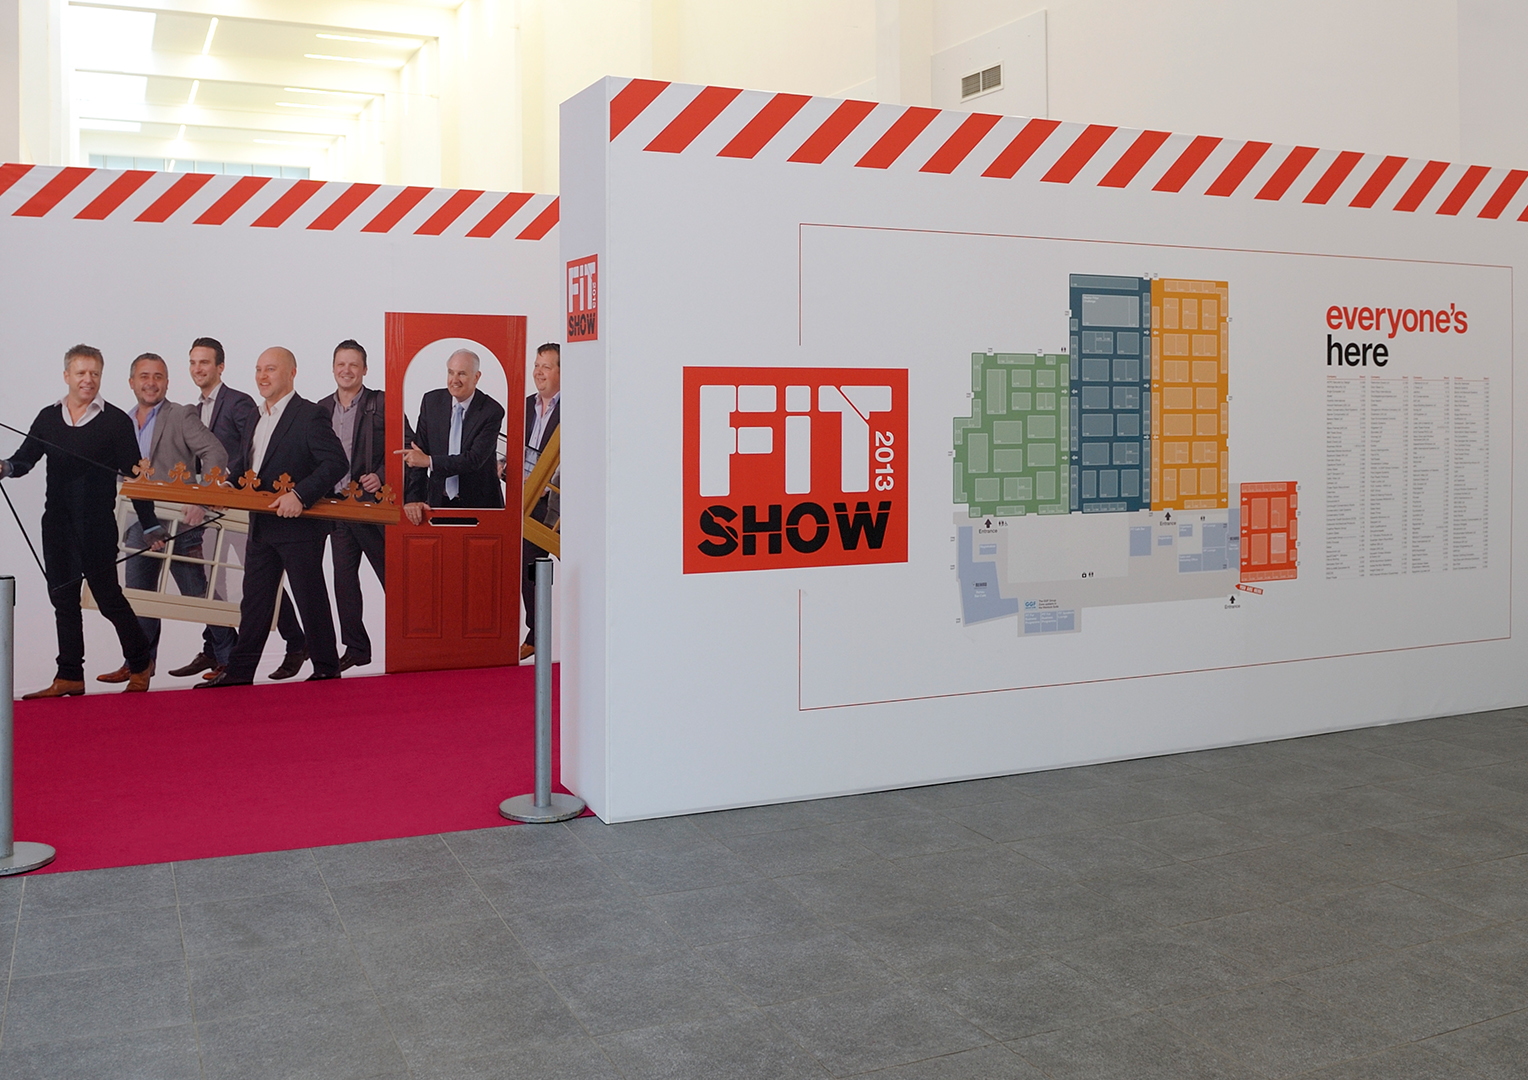 The Fit Show Event. Signage and wayfinders. Creative artwork and graphic design.